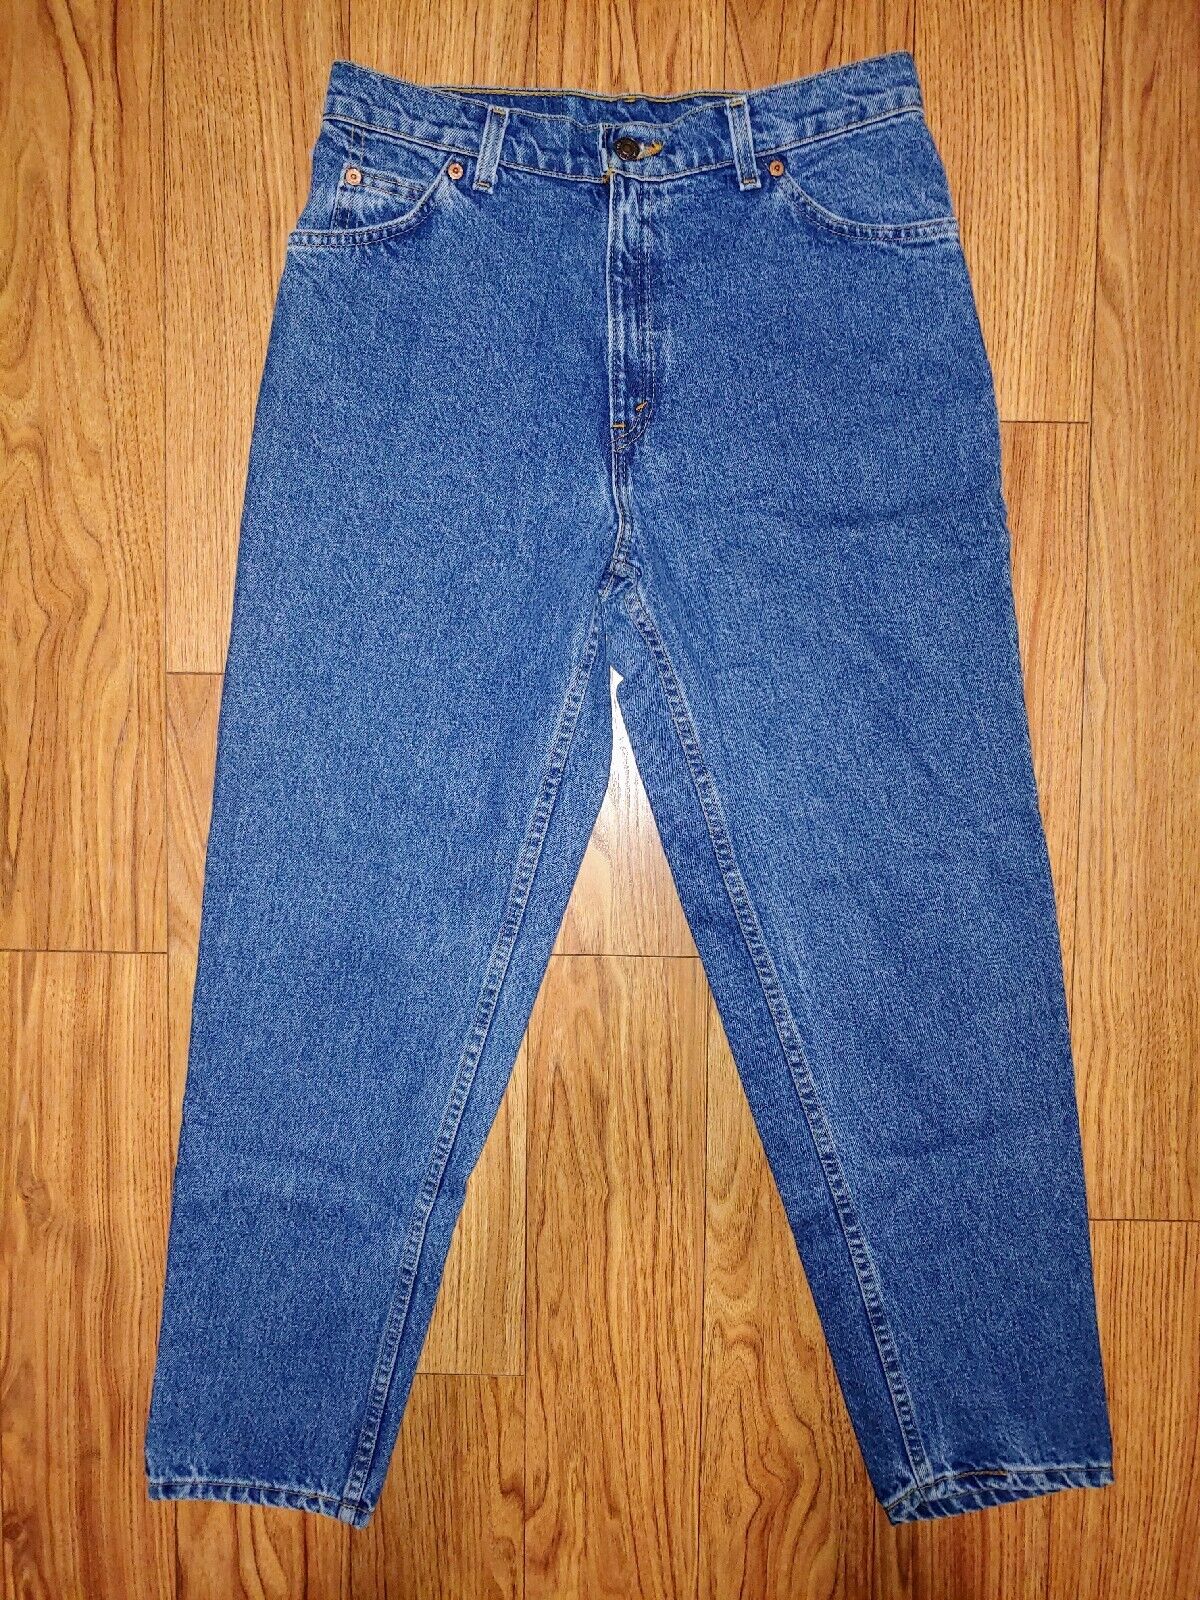 LEVIS Vintage 10950 High Rise Tapered Leg Relaxed Fit Denim Jeans Size